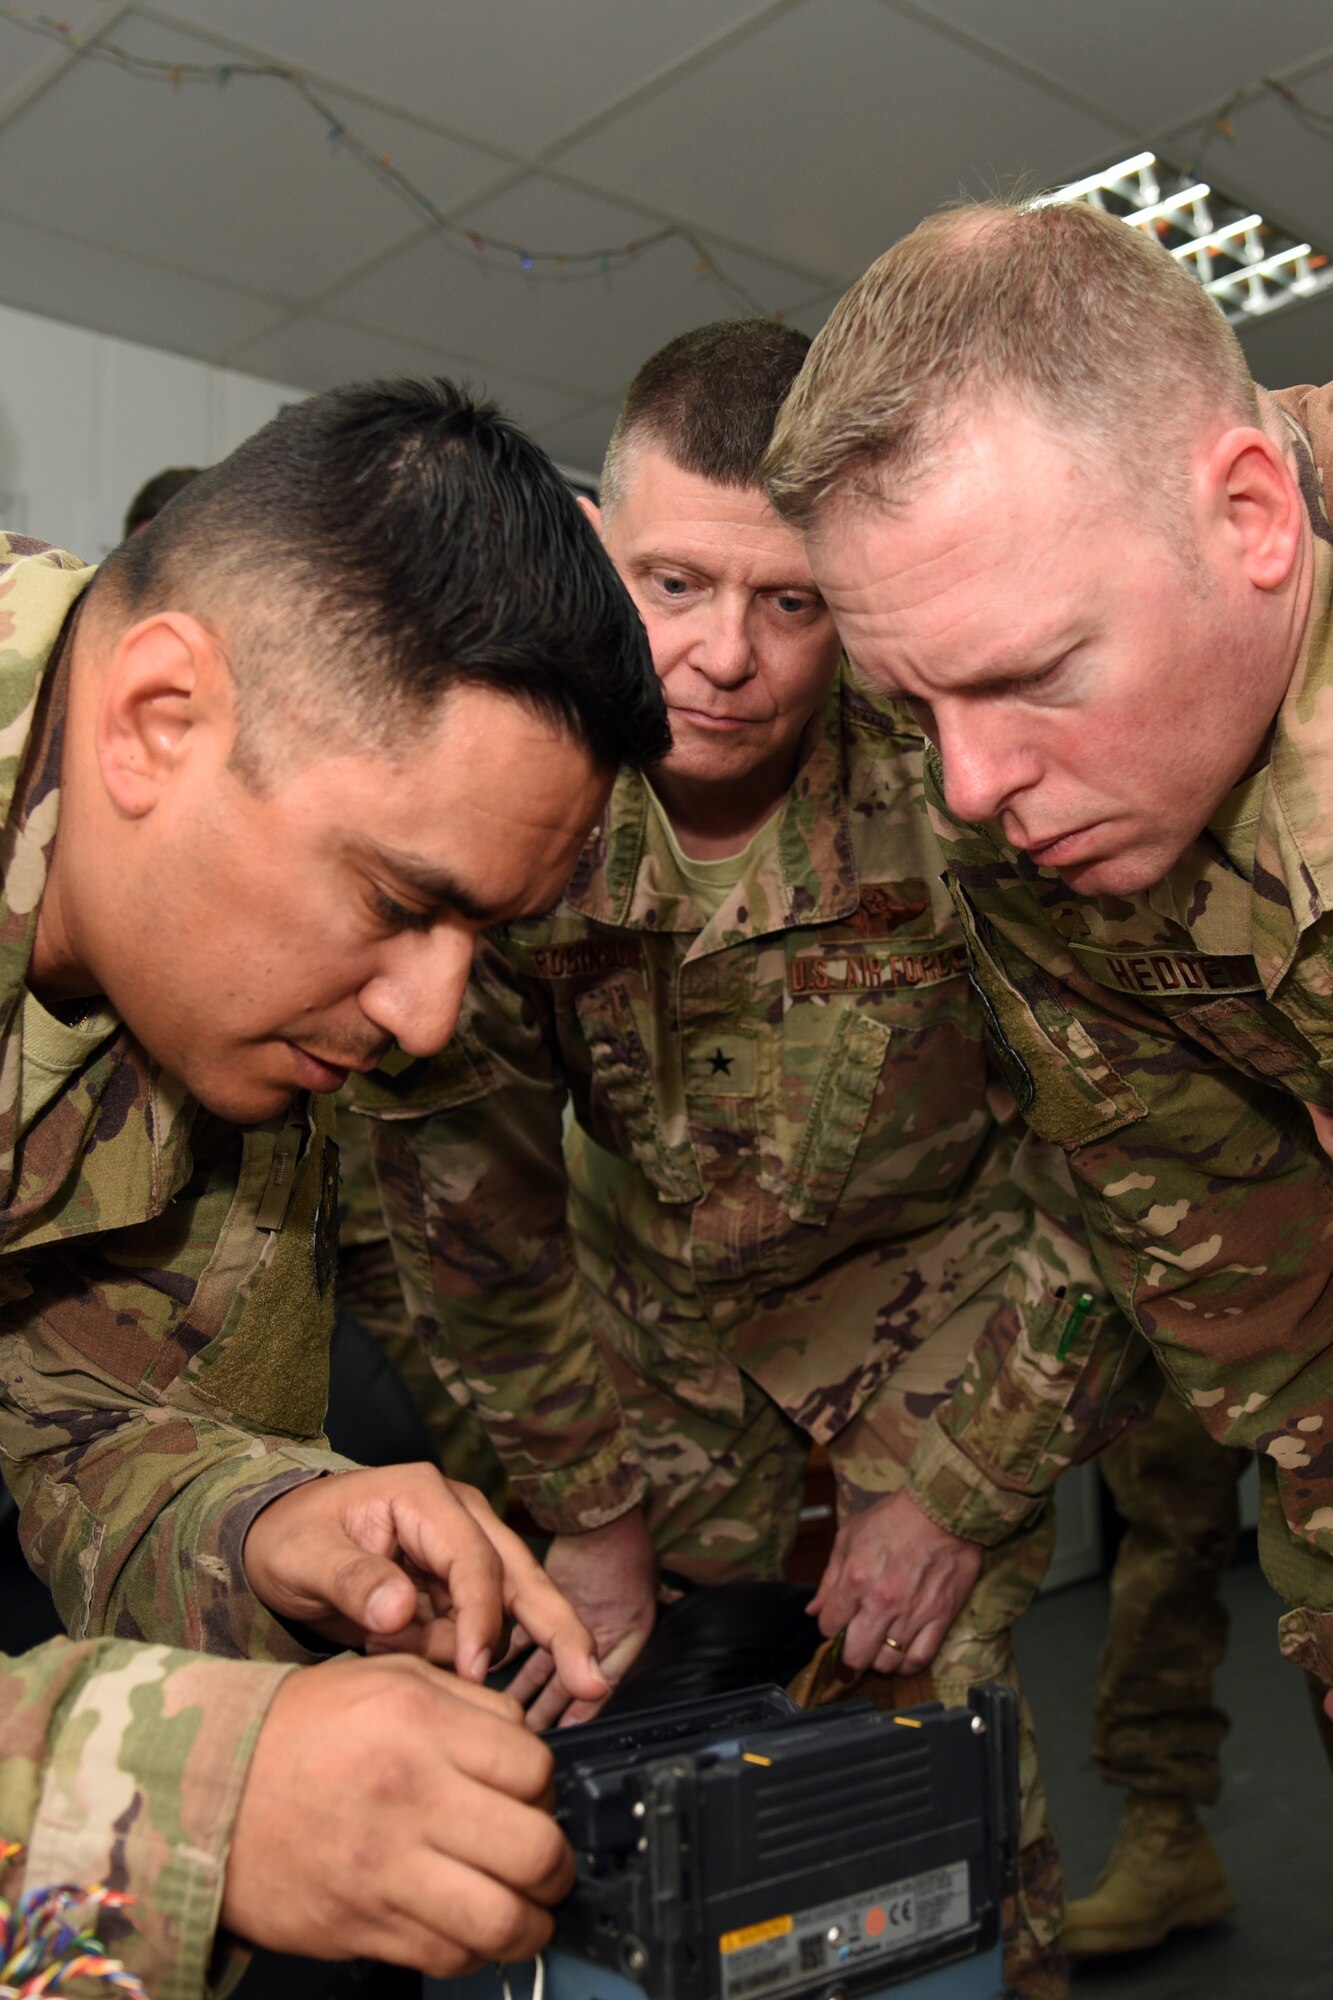 U.S. Air Force Tech. Sgt. Kristofer Canales, 407th Expeditionary Communications Squadron Cable Maintenance NCO in charge, shows Brig. Gen. Kyle Robinson, 332nd Air Expeditionary Wing commander, and Chief Master Sgt. Benjamin Hedden, 332nd command chief, how to fuse fiber optic cables together at an undisclosed location in Southwest Asia March 5. During the visit, Robinson and Hedden took the time to learn various duties and responsibilities of the 407th Air Expeditionary Group Airmen. (U.S. Air Force photo by Staff Sgt. Joshua Edwards/Released)